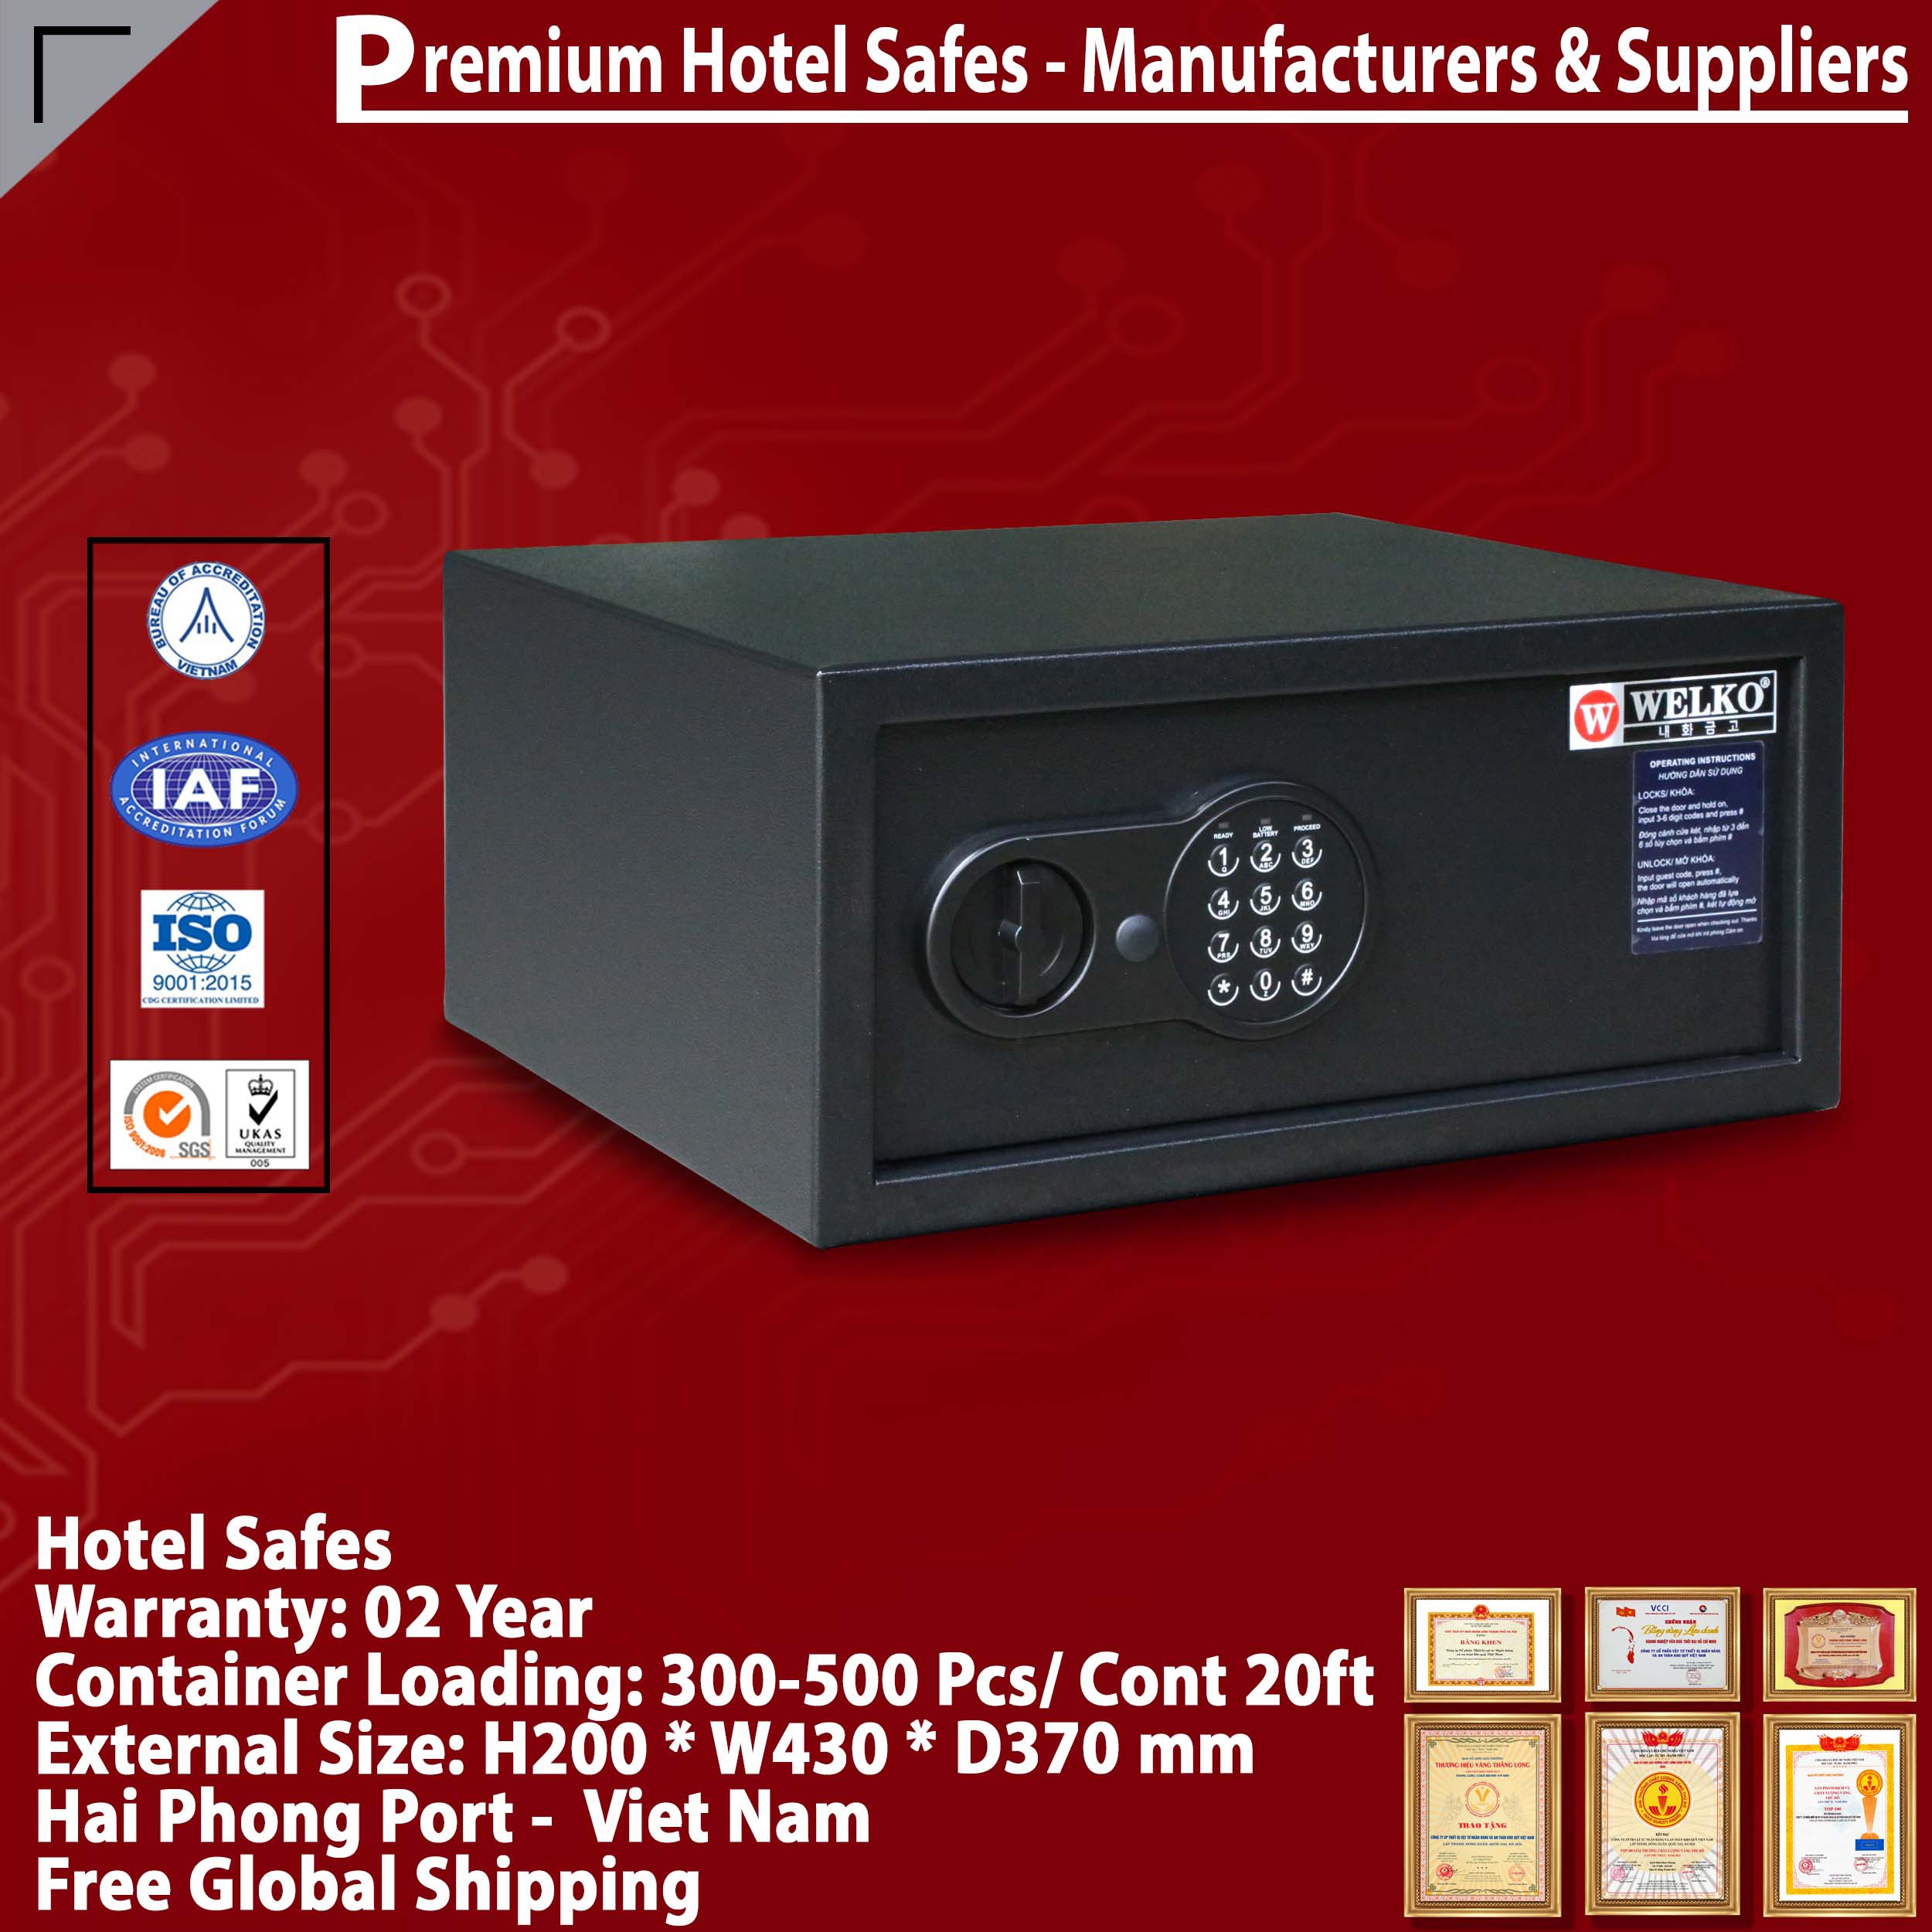 Hotel Room Safe Manufacturing Facility